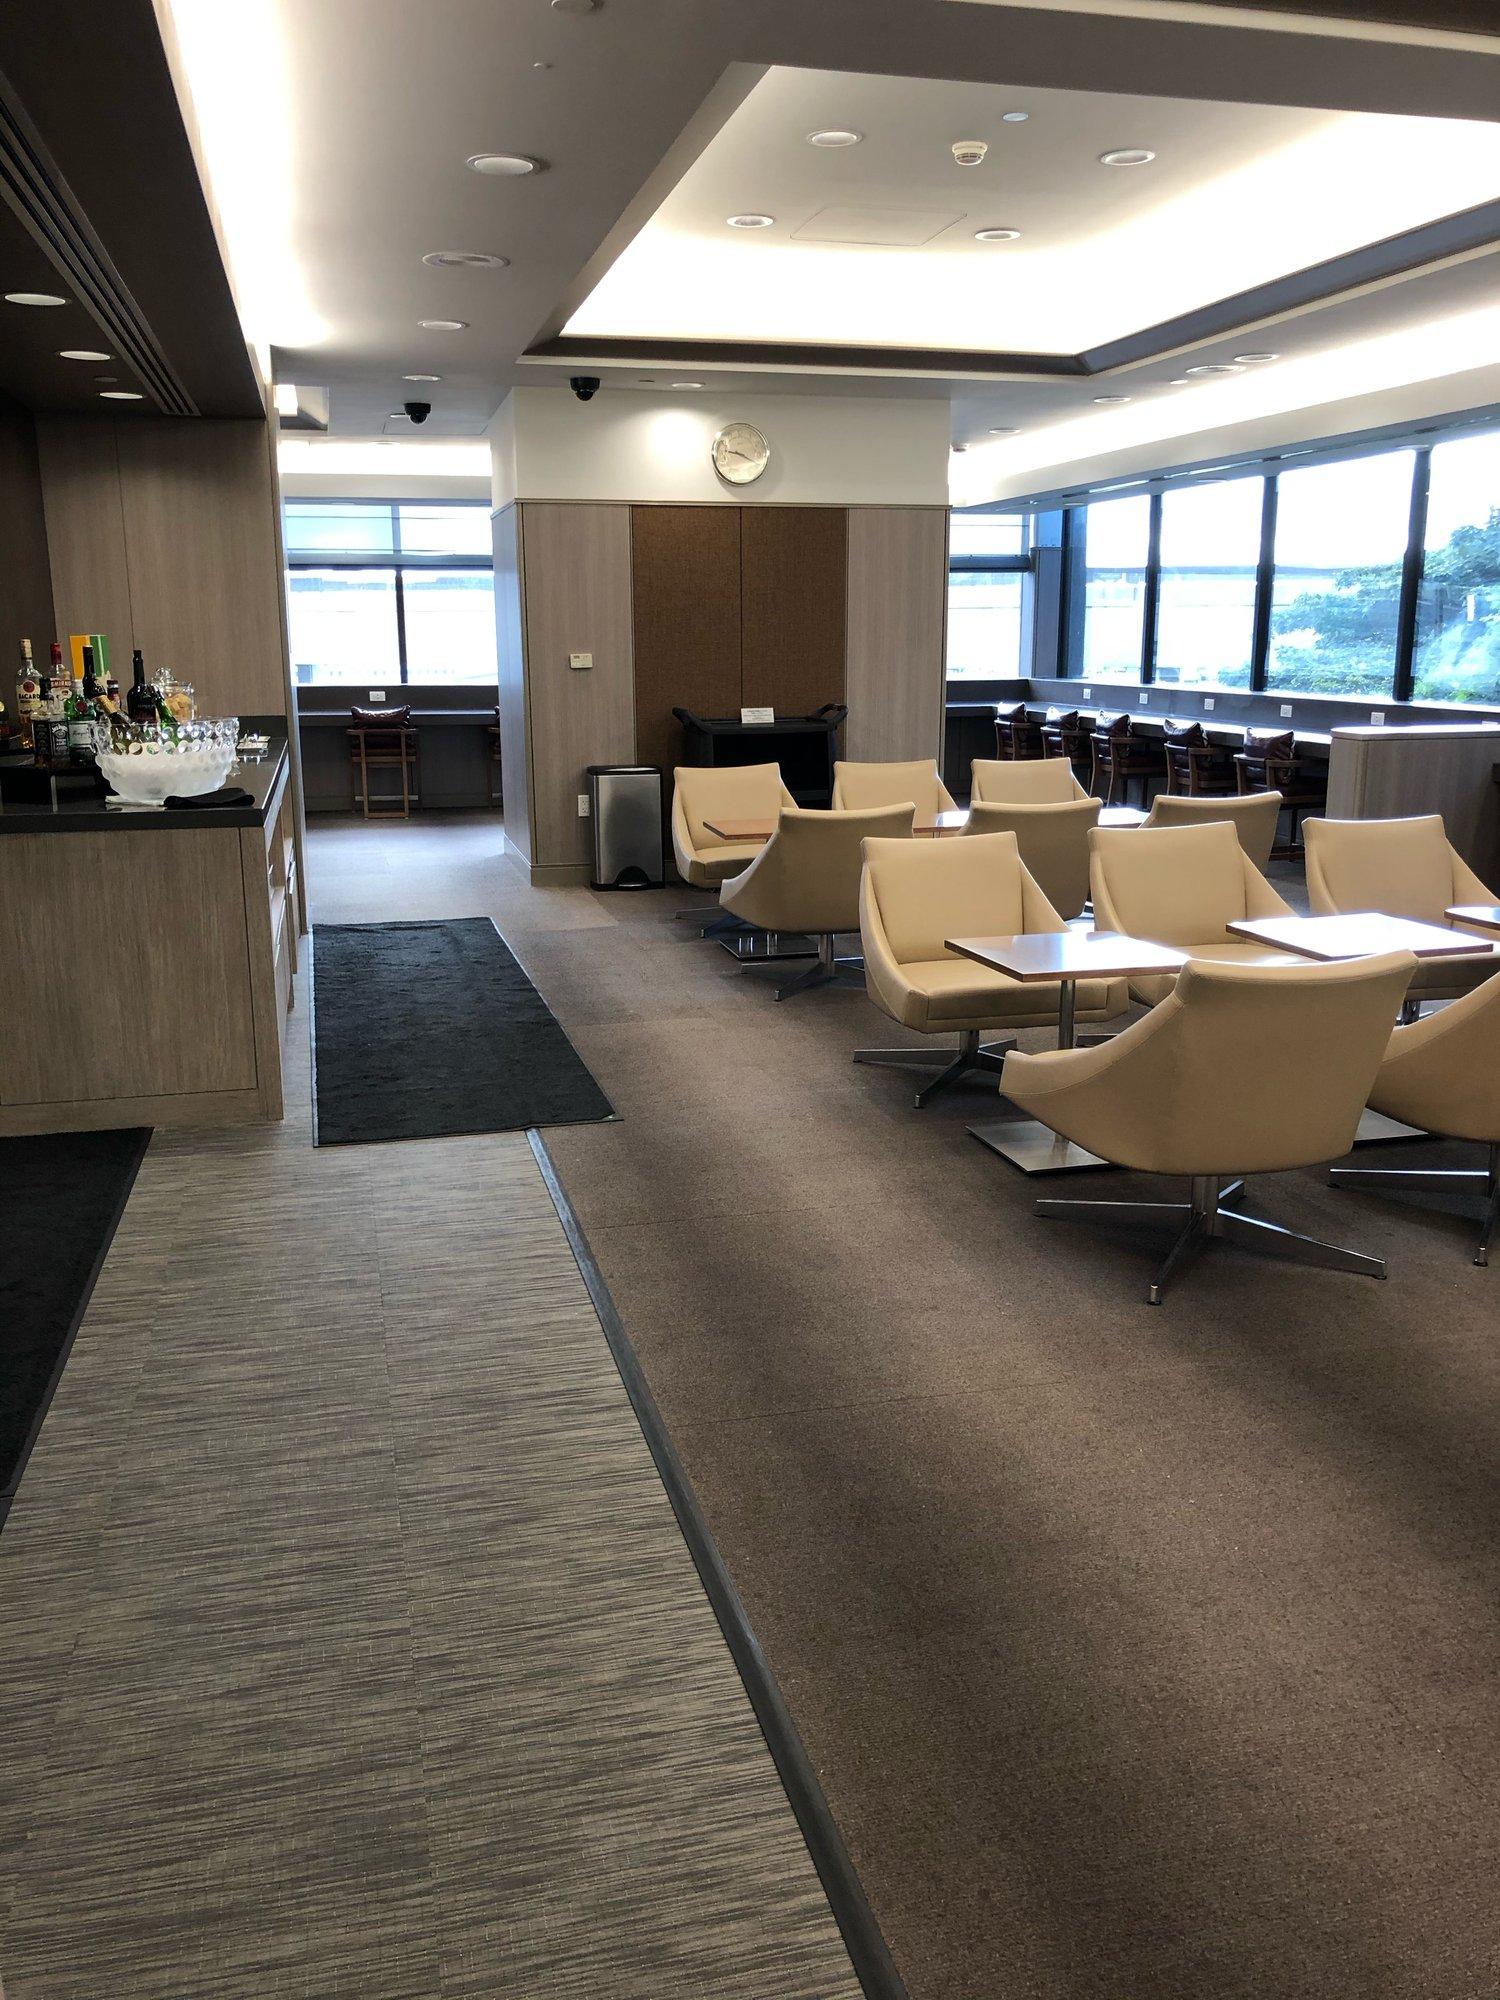 Japan Airlines JAL Sakura Lounge / American Airlines Admirals Club image 7 of 11